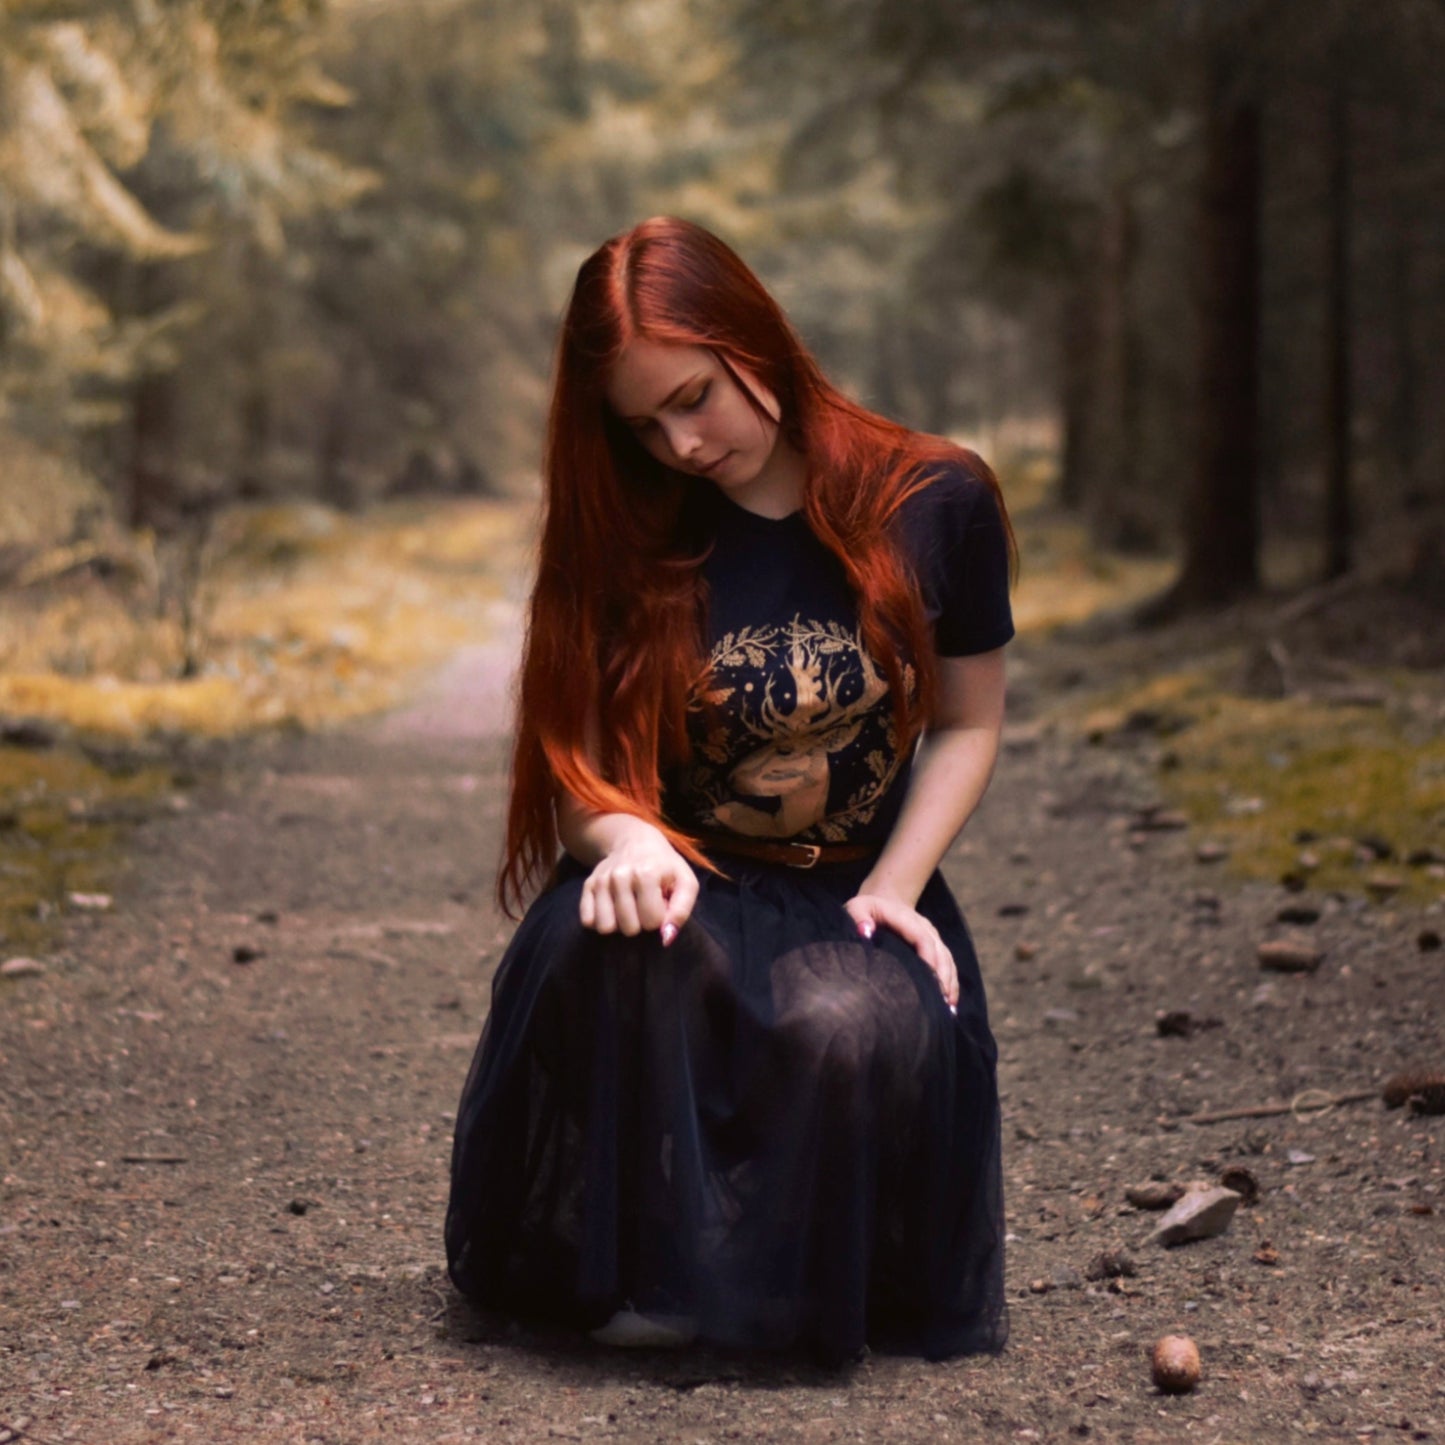 A redhead girl kneel in the middle of the forest